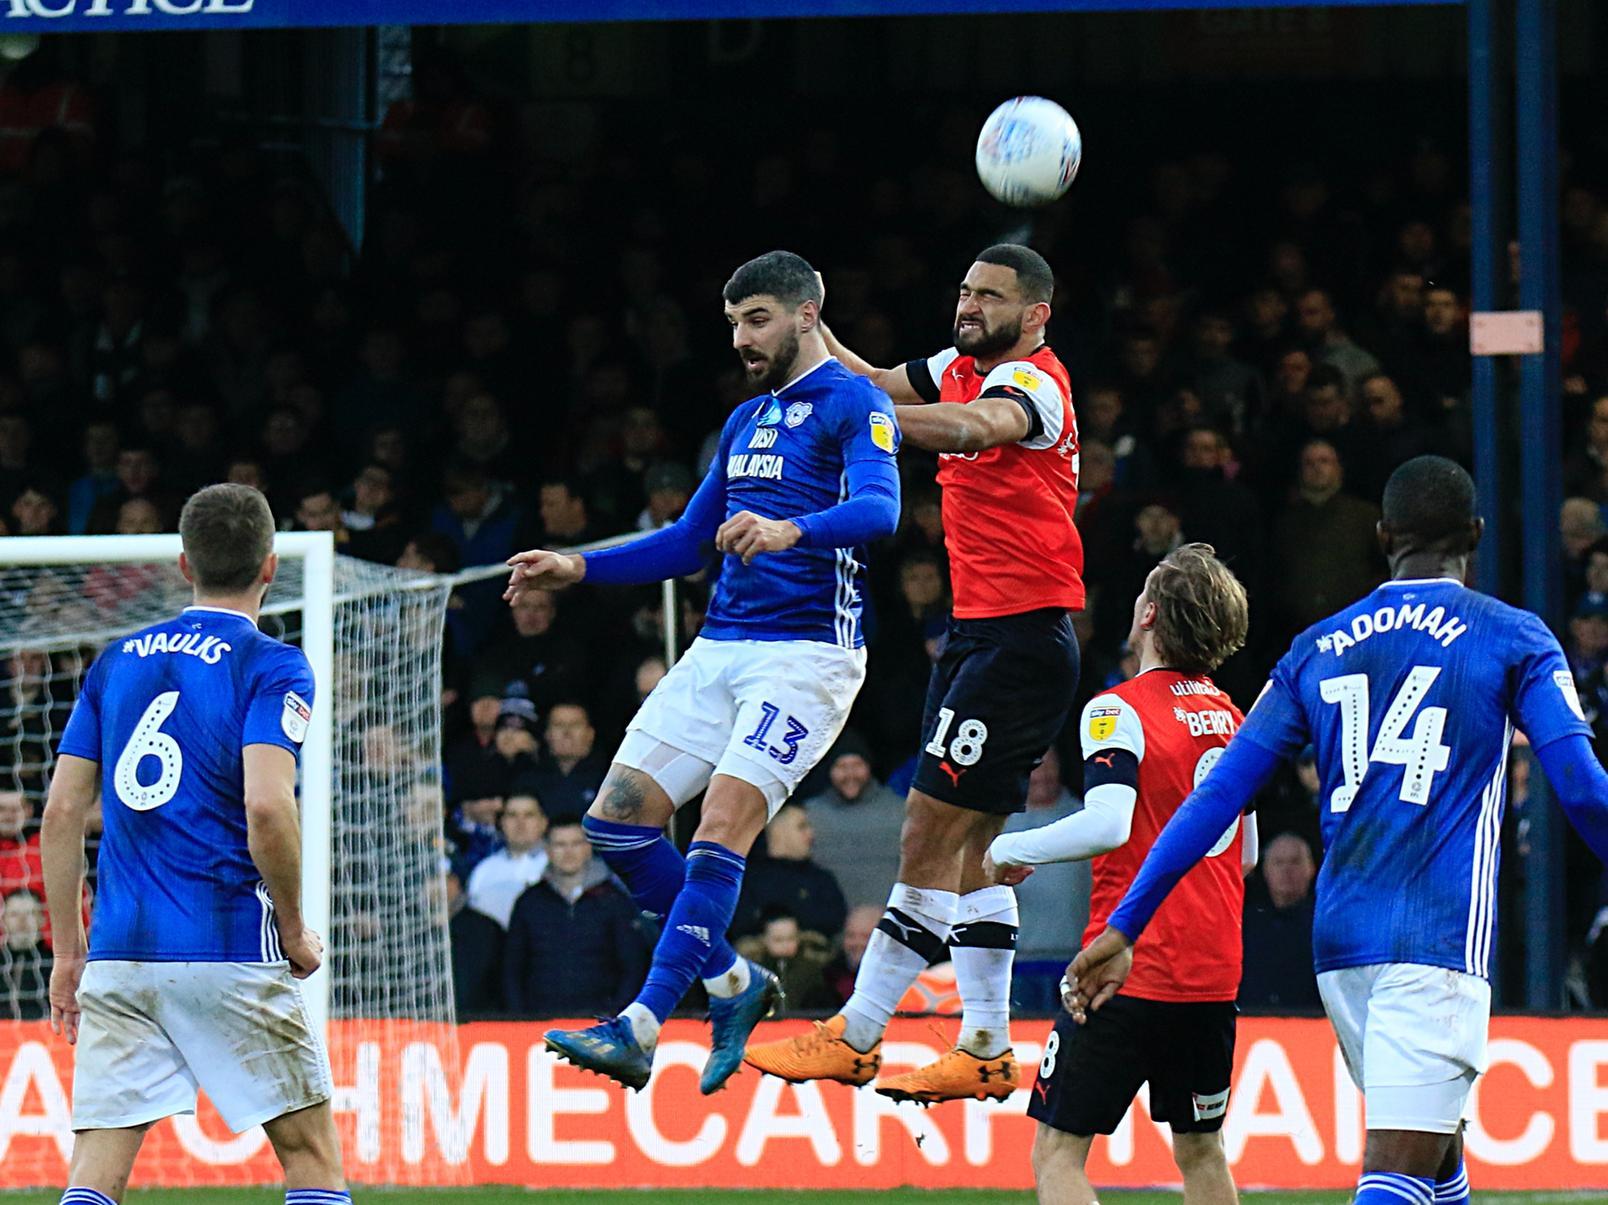 Cameron Carter-Vickers clears the danger against Cardiff